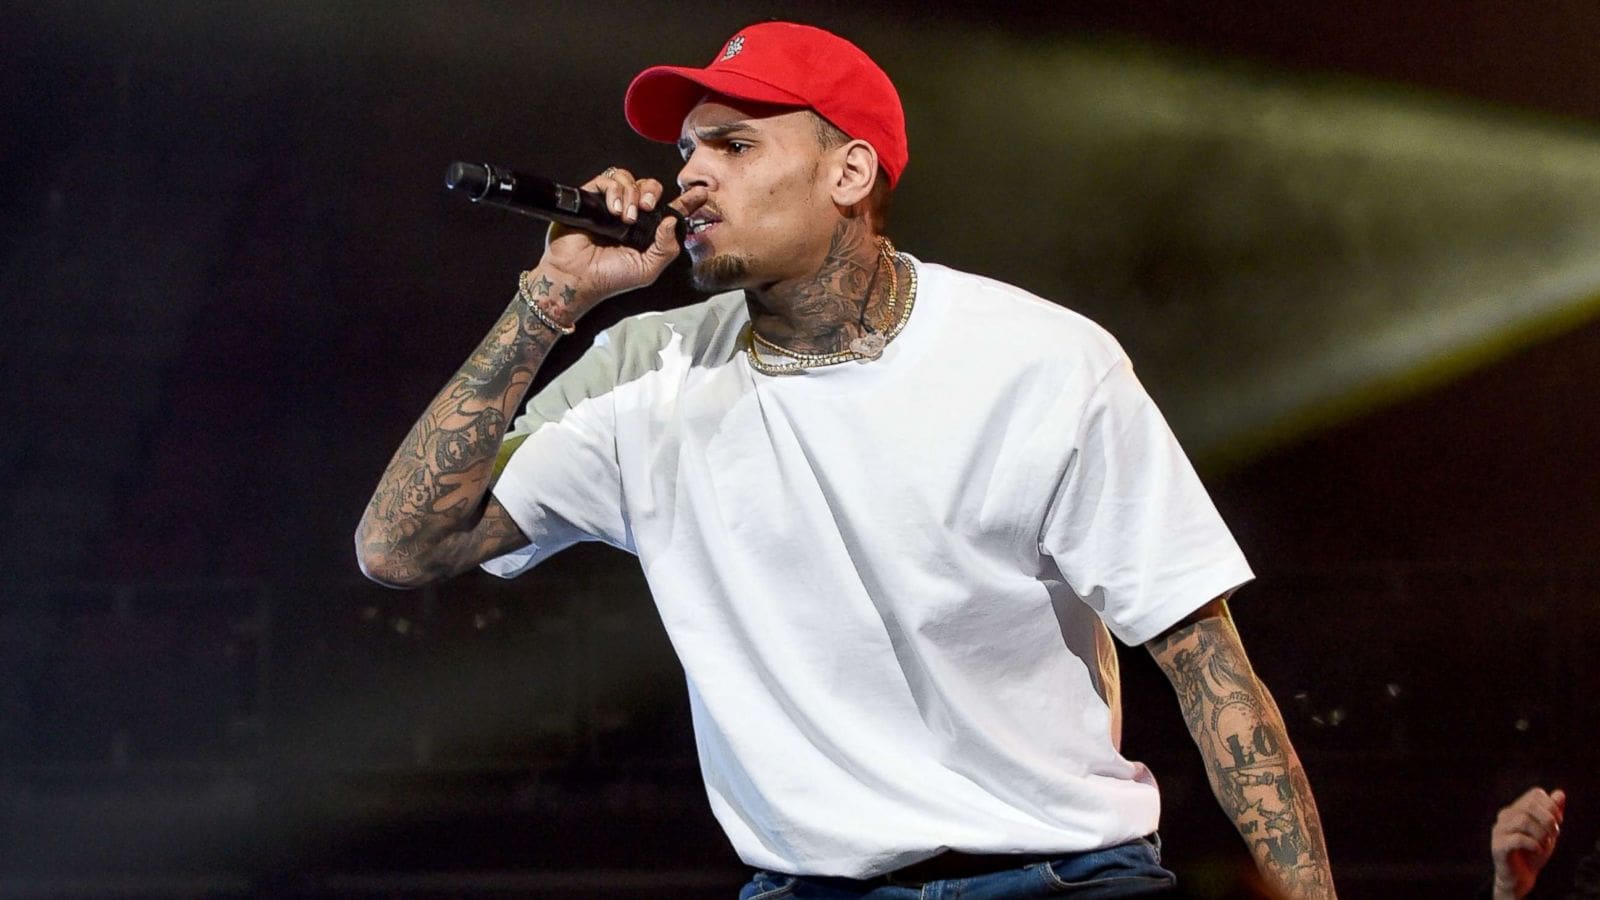 Chris Brown's Fans Are Gushing Over His Dance Which Seems To Come So Natural